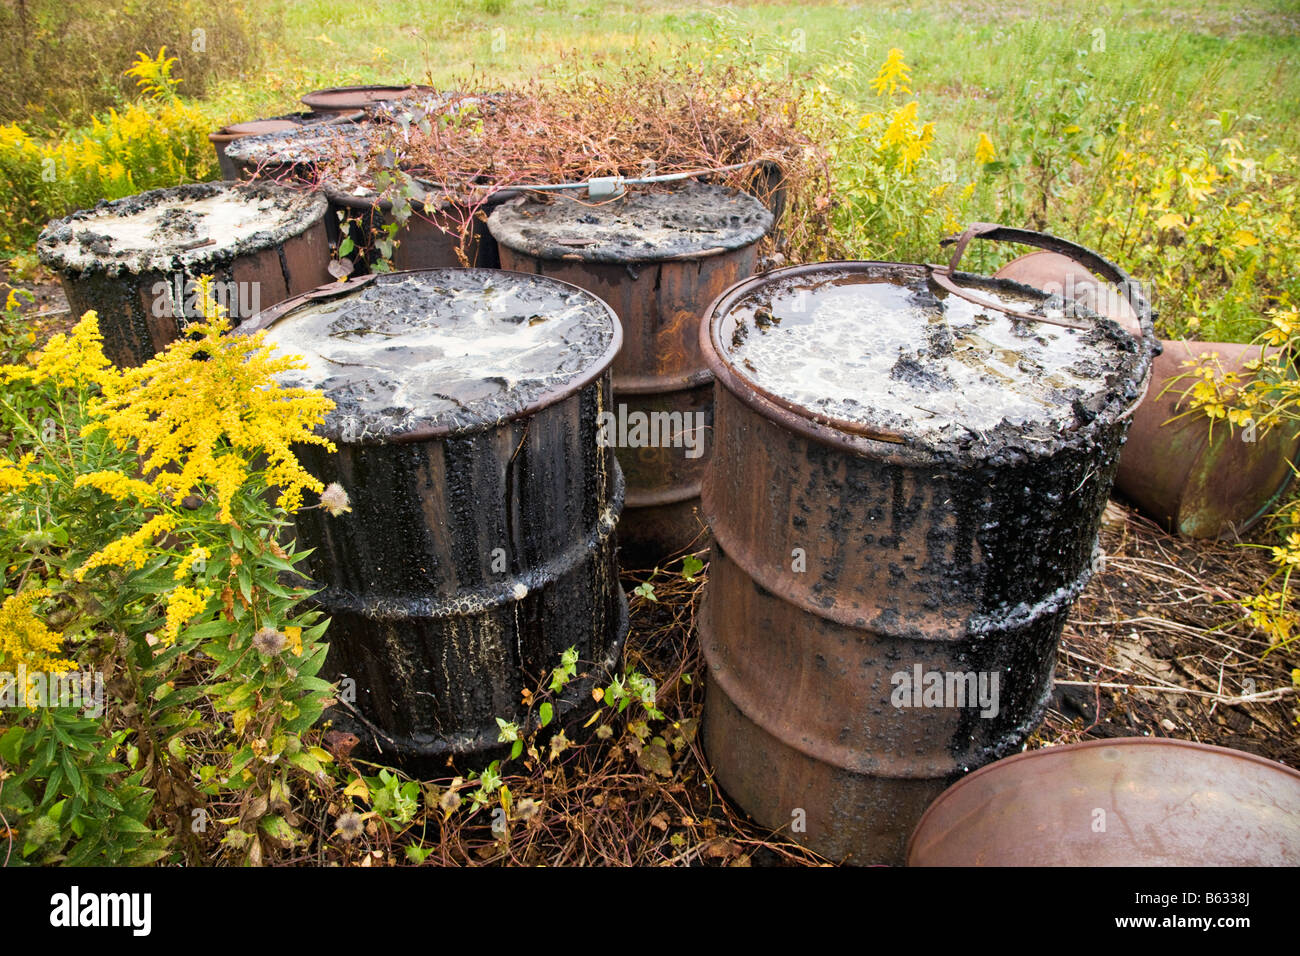 Abandoned corroding rusting oxidizing 55 gallon metal drums. Stock Photo